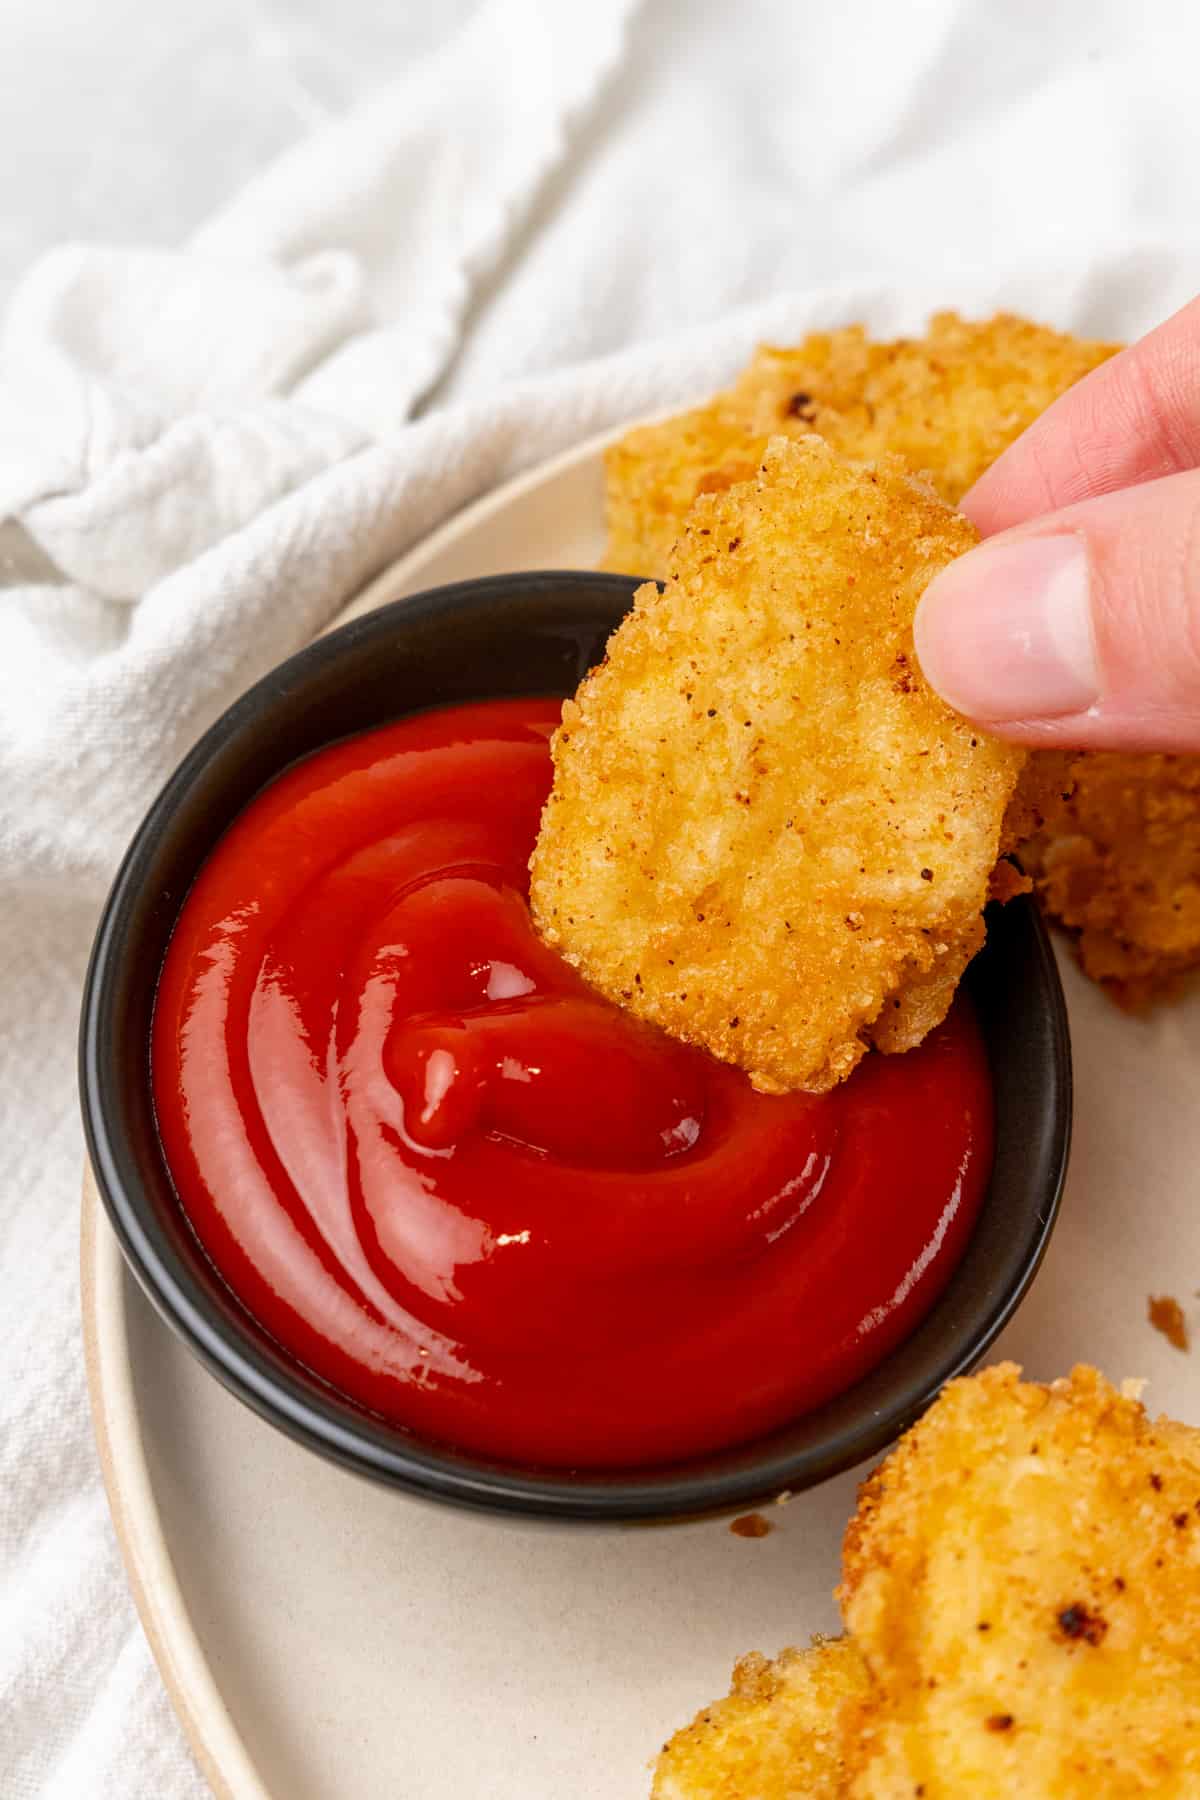 Nuggets with ketchup.